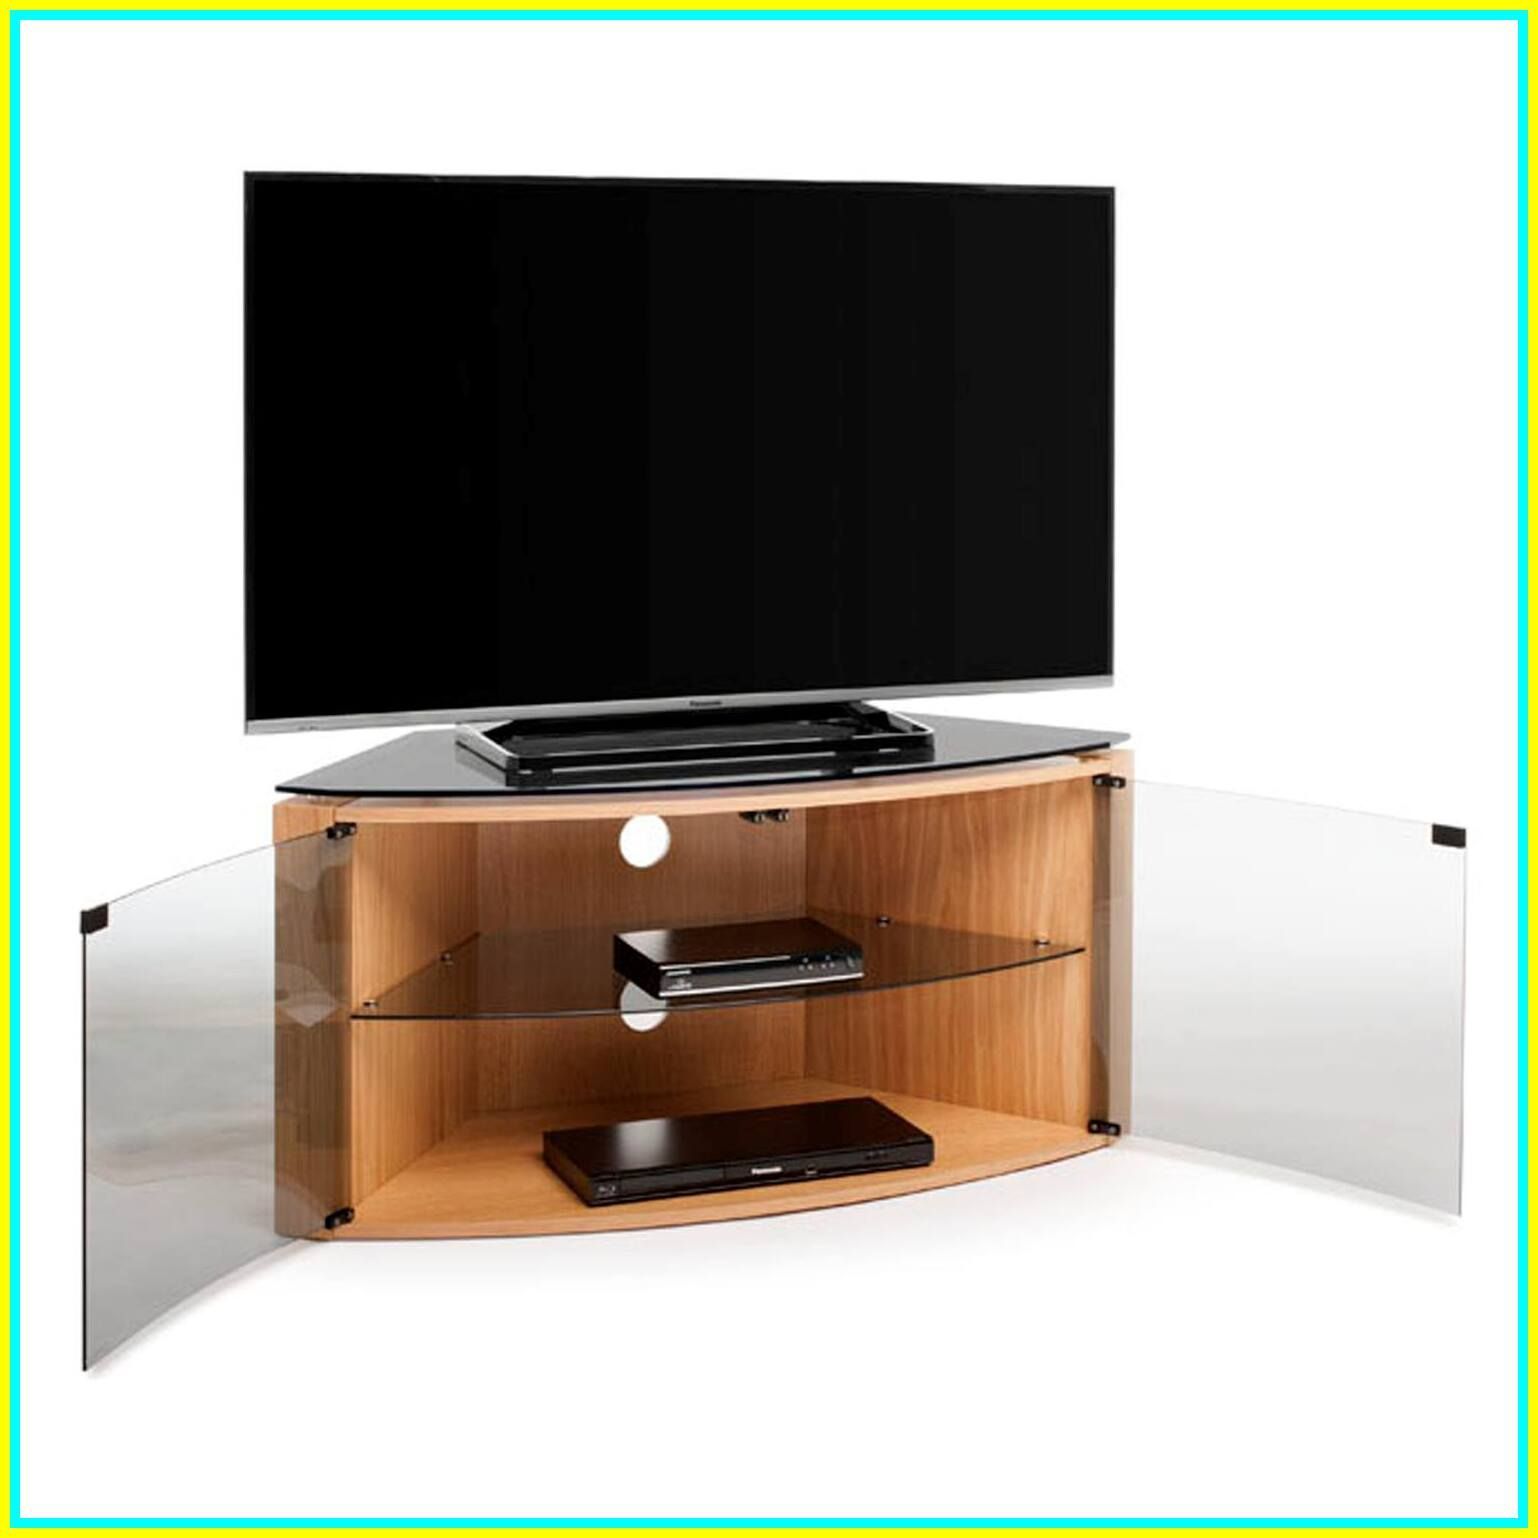 82 Reference Of Corner Tv Stand Glass Doors In 2020 | Tv Throughout Corner Tv Cabinets With Glass Doors (View 8 of 15)